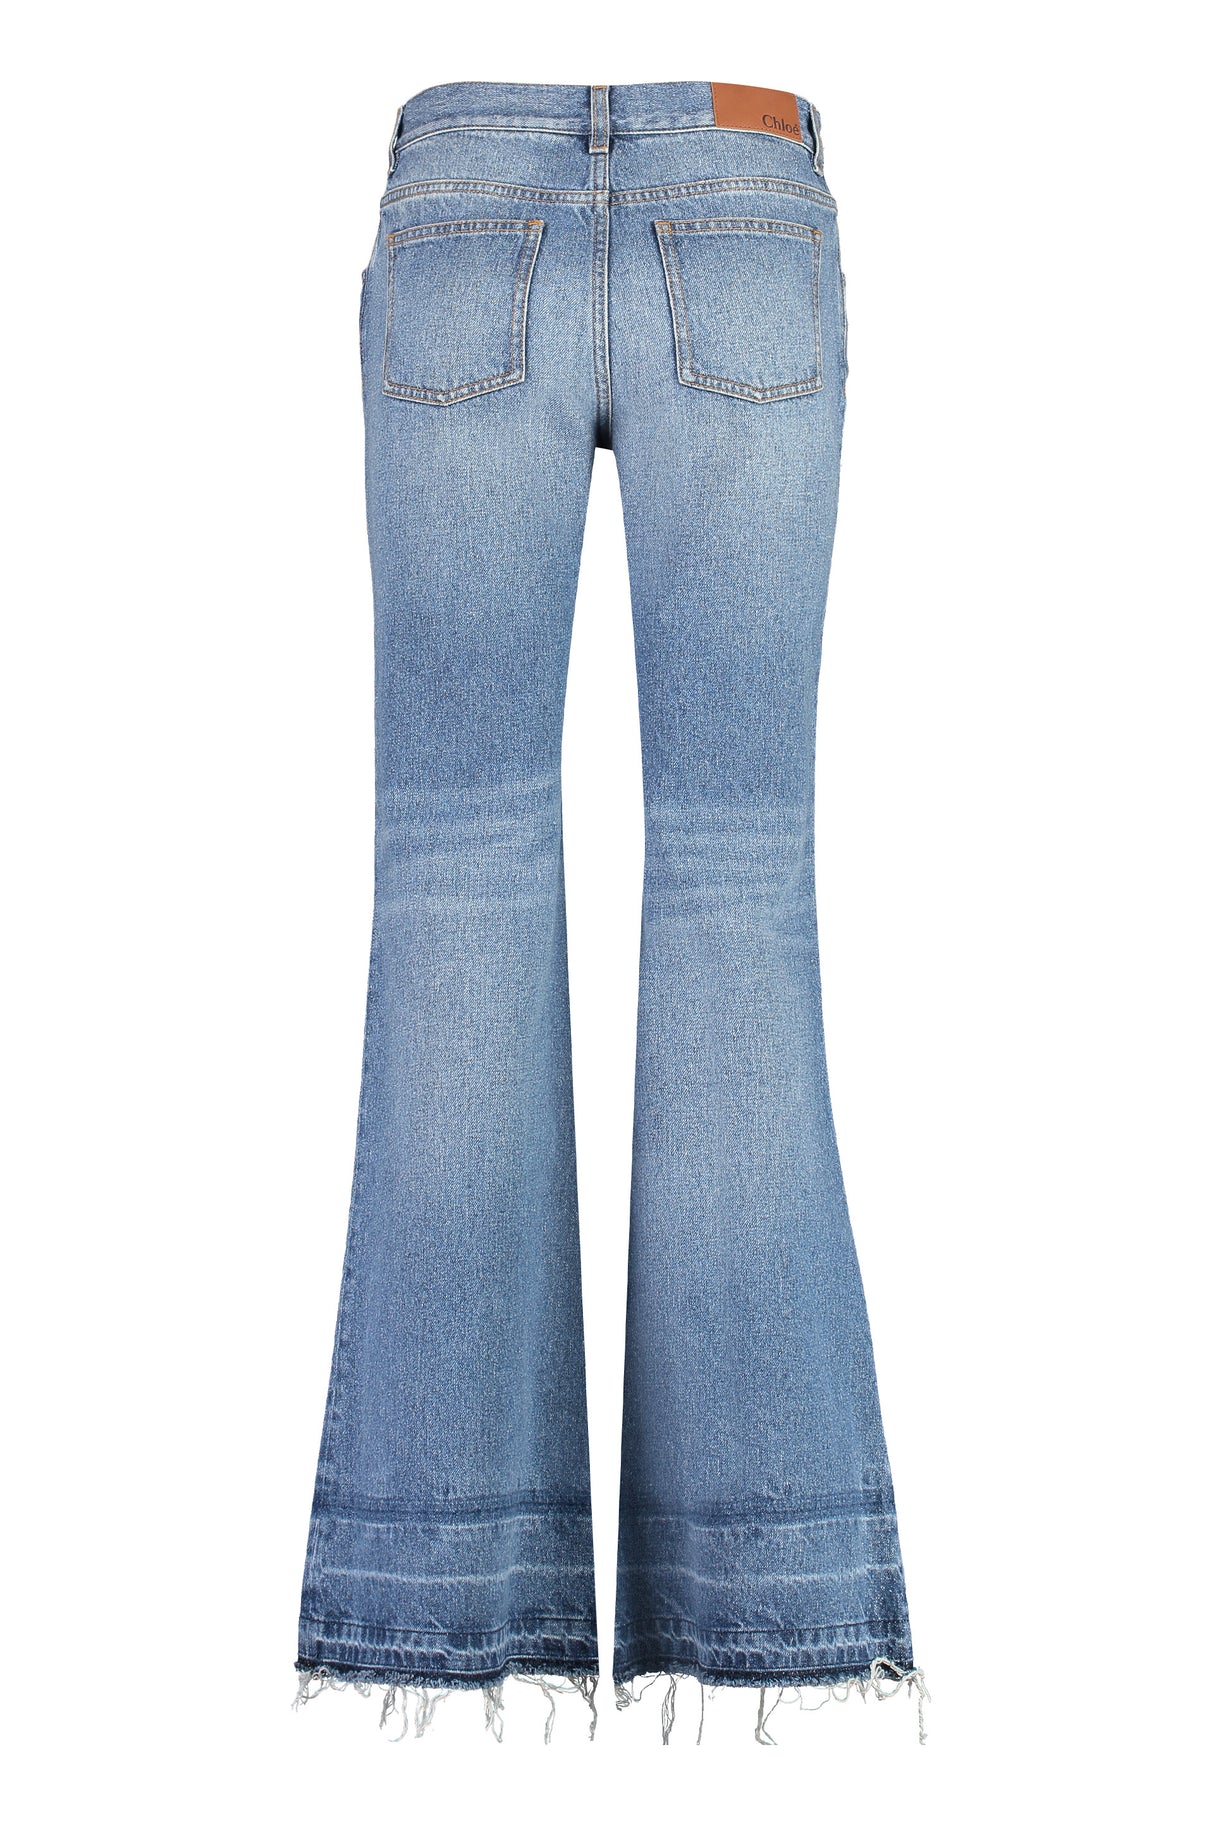 CHLOÉ Flared Low-Rise Denim Jeans with Visible Stitching and Fringed Hemline for Women